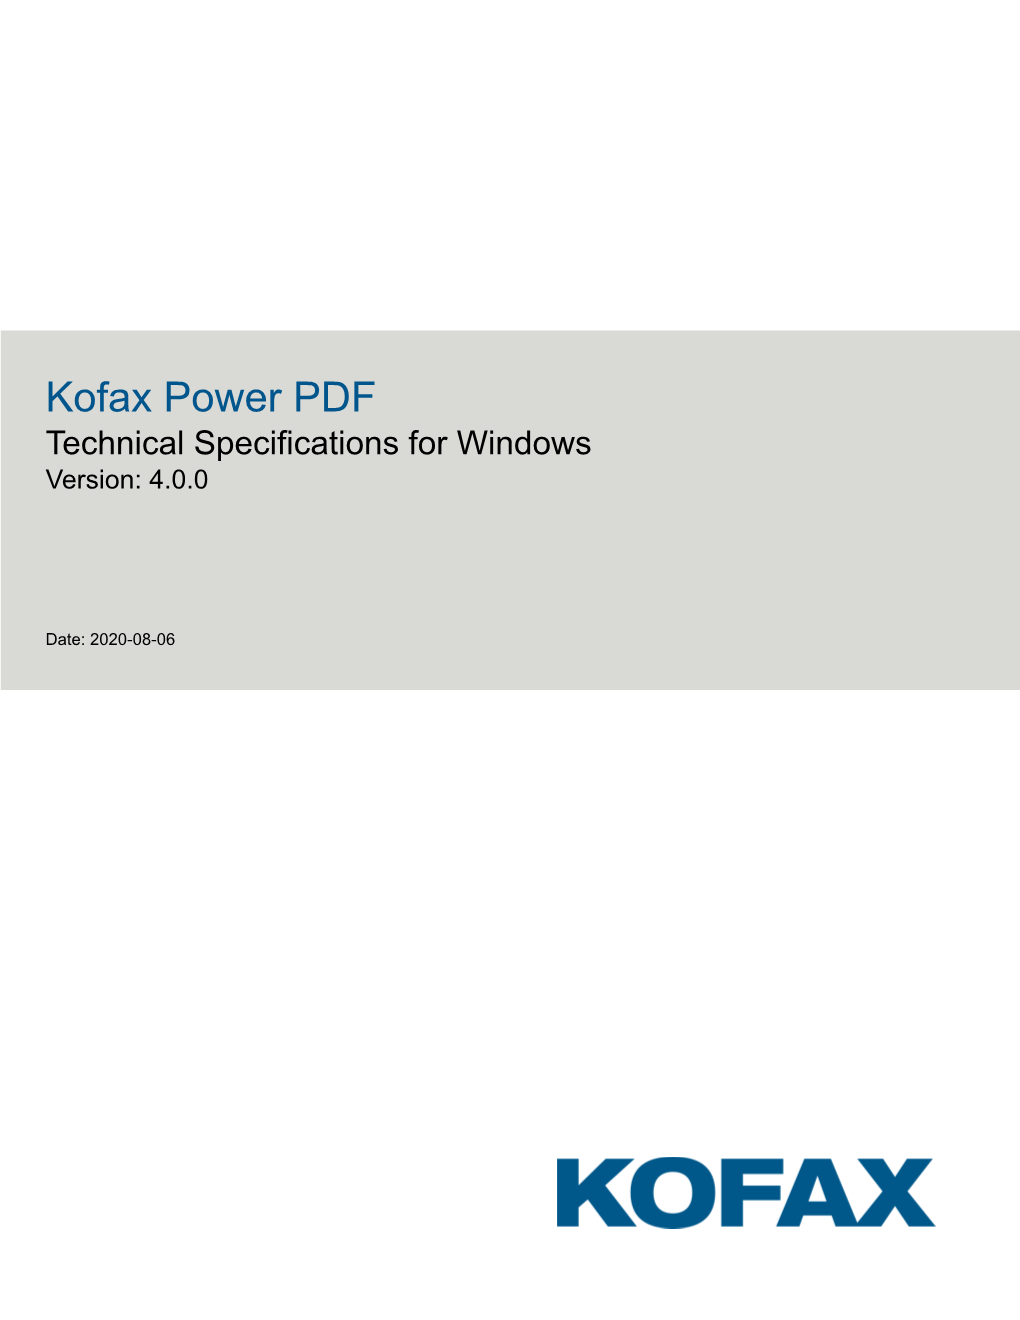 Kofax Power PDF Technical Specifications for Windows Version: 4.0.0